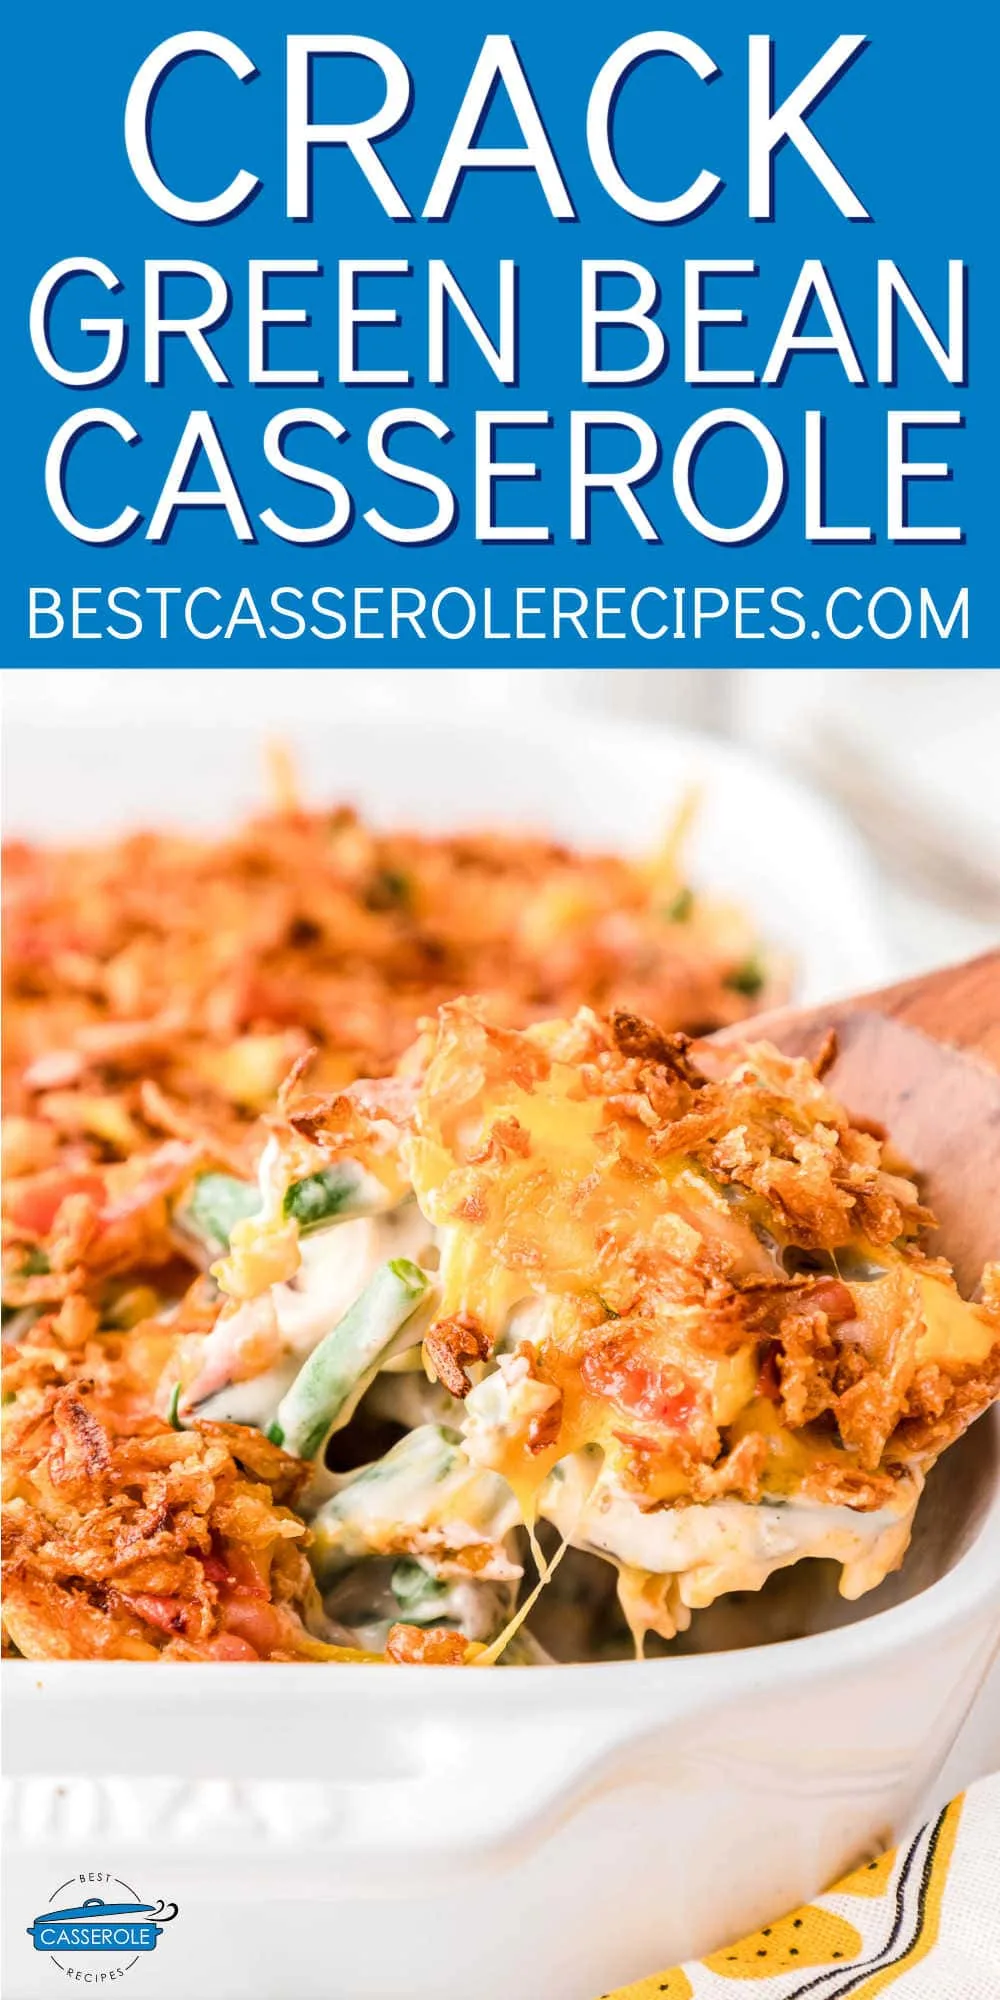 scoop of casserole with blue banner and text